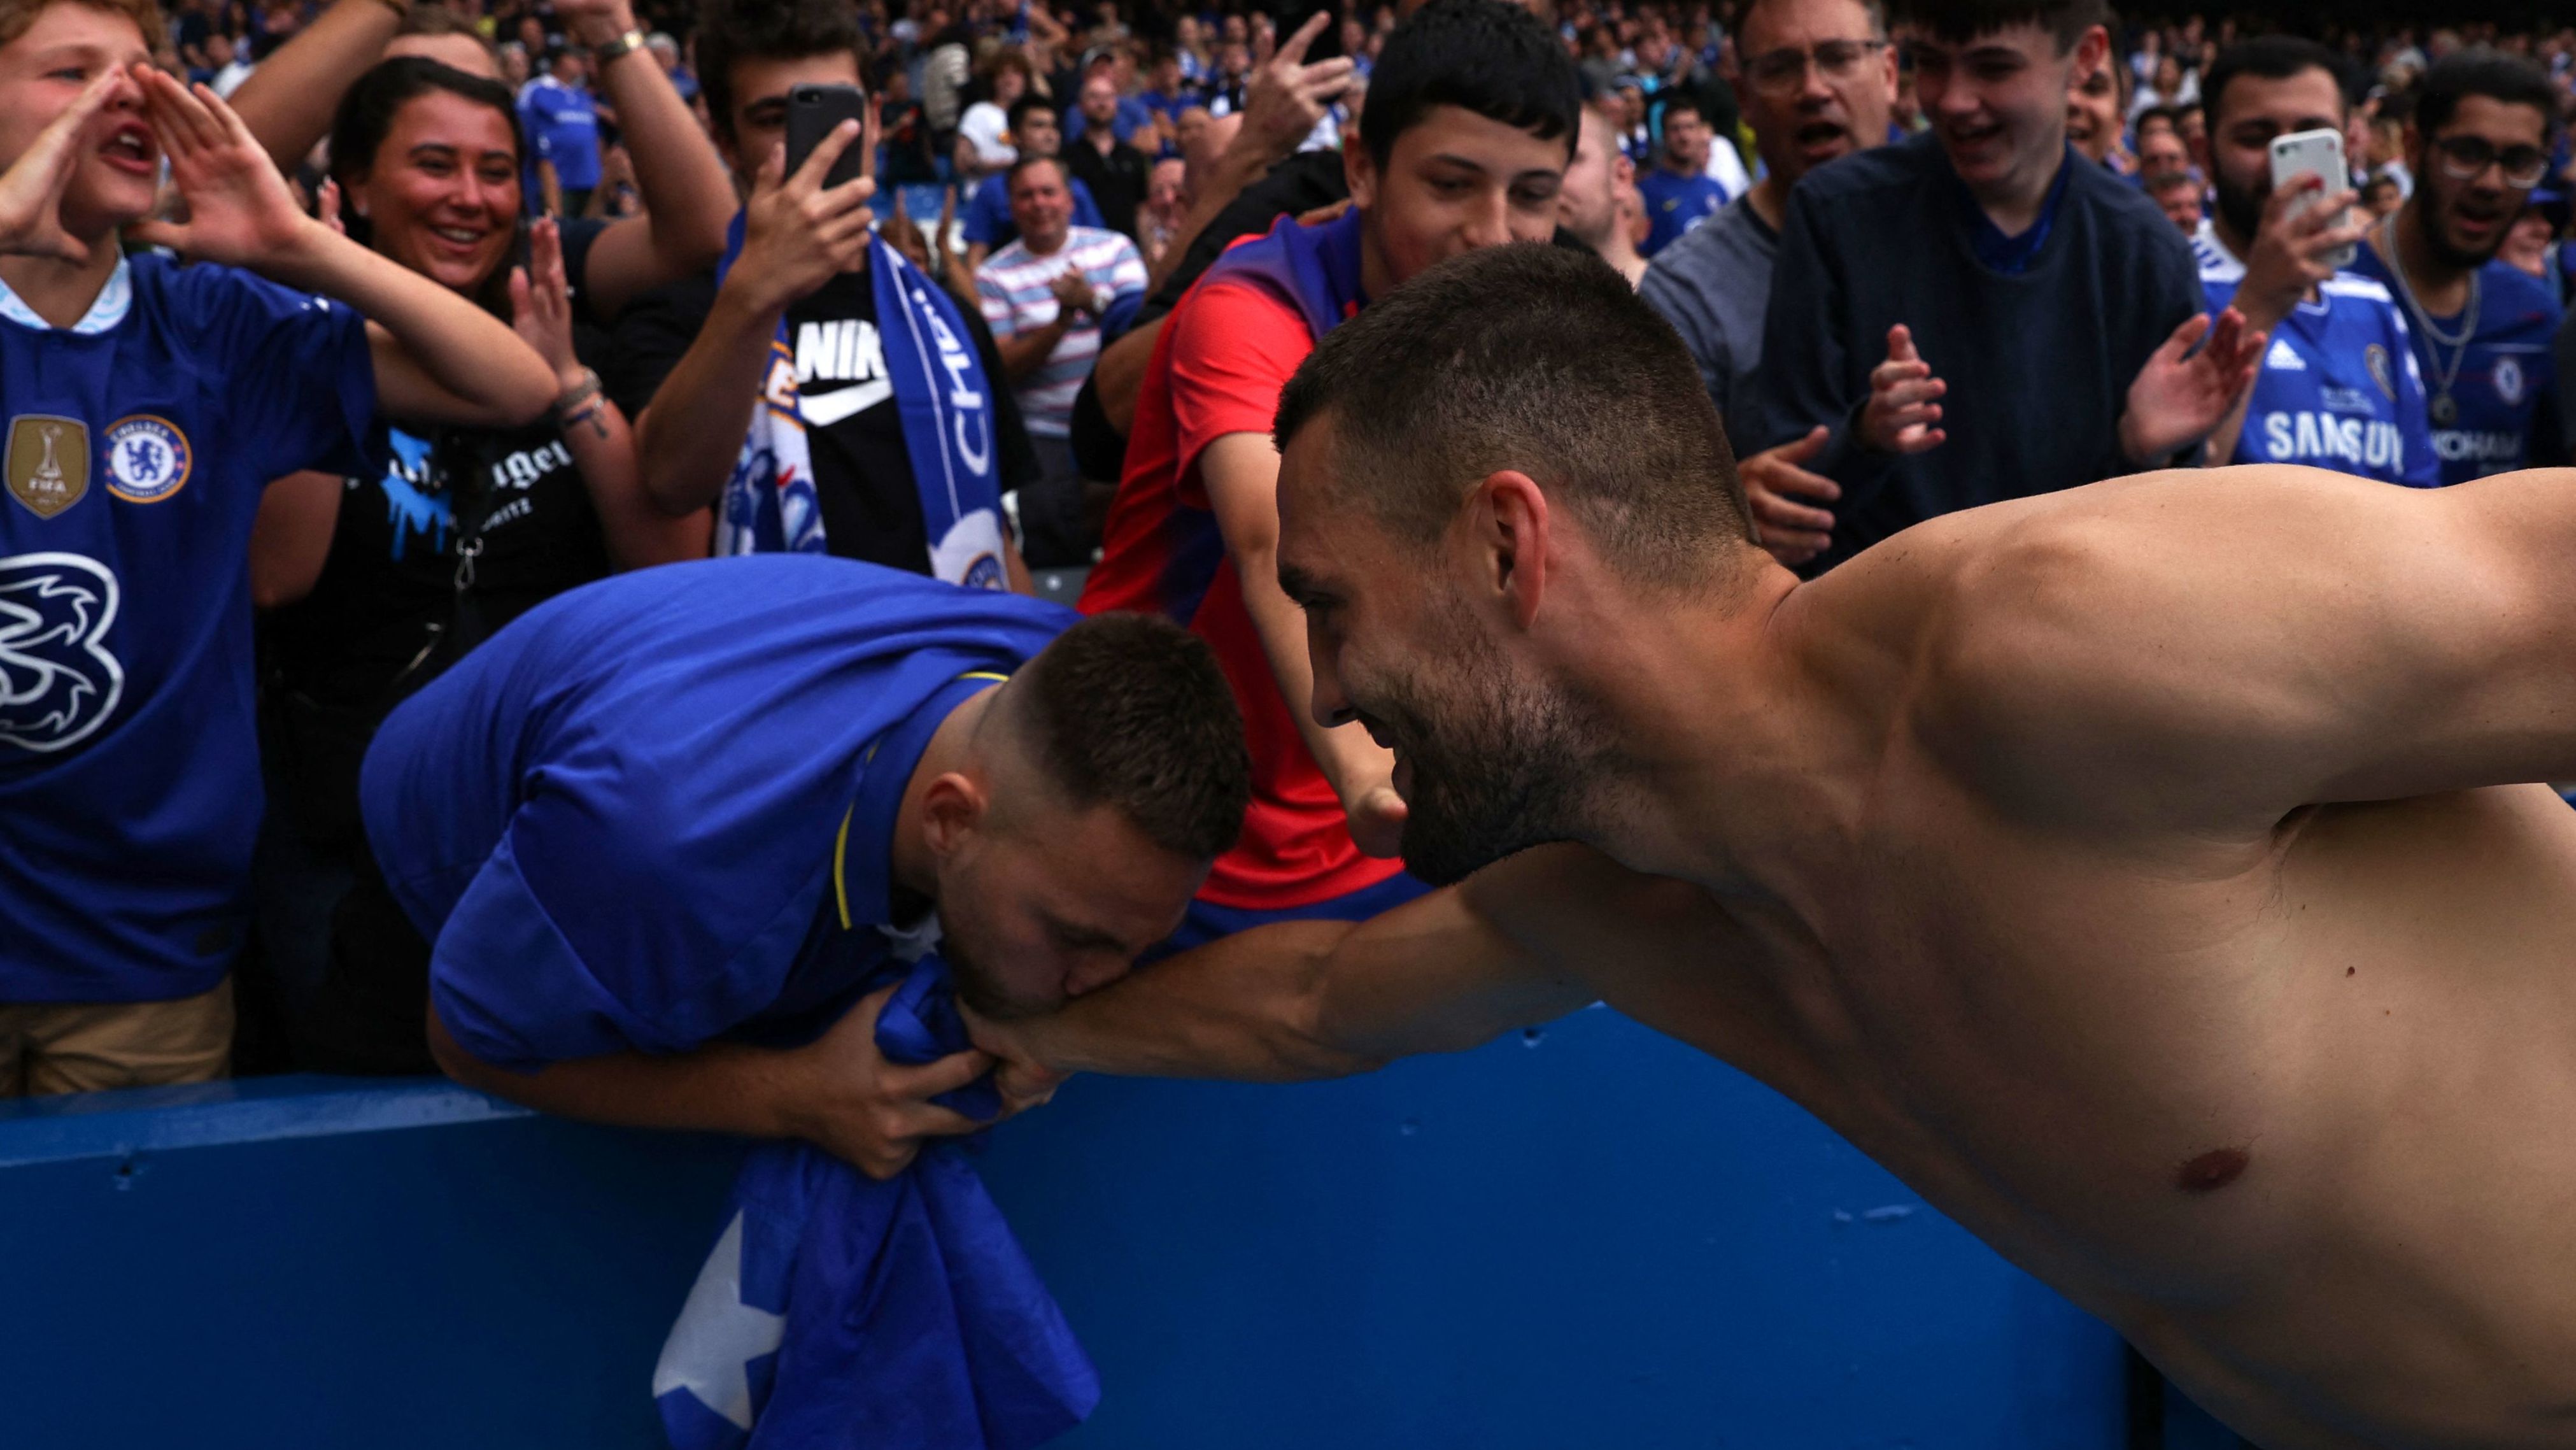 A fan kisses Chelsea's Mateo Kovacic after the player gave him his jersey following a Premier League match in London on Saturday, September 3.